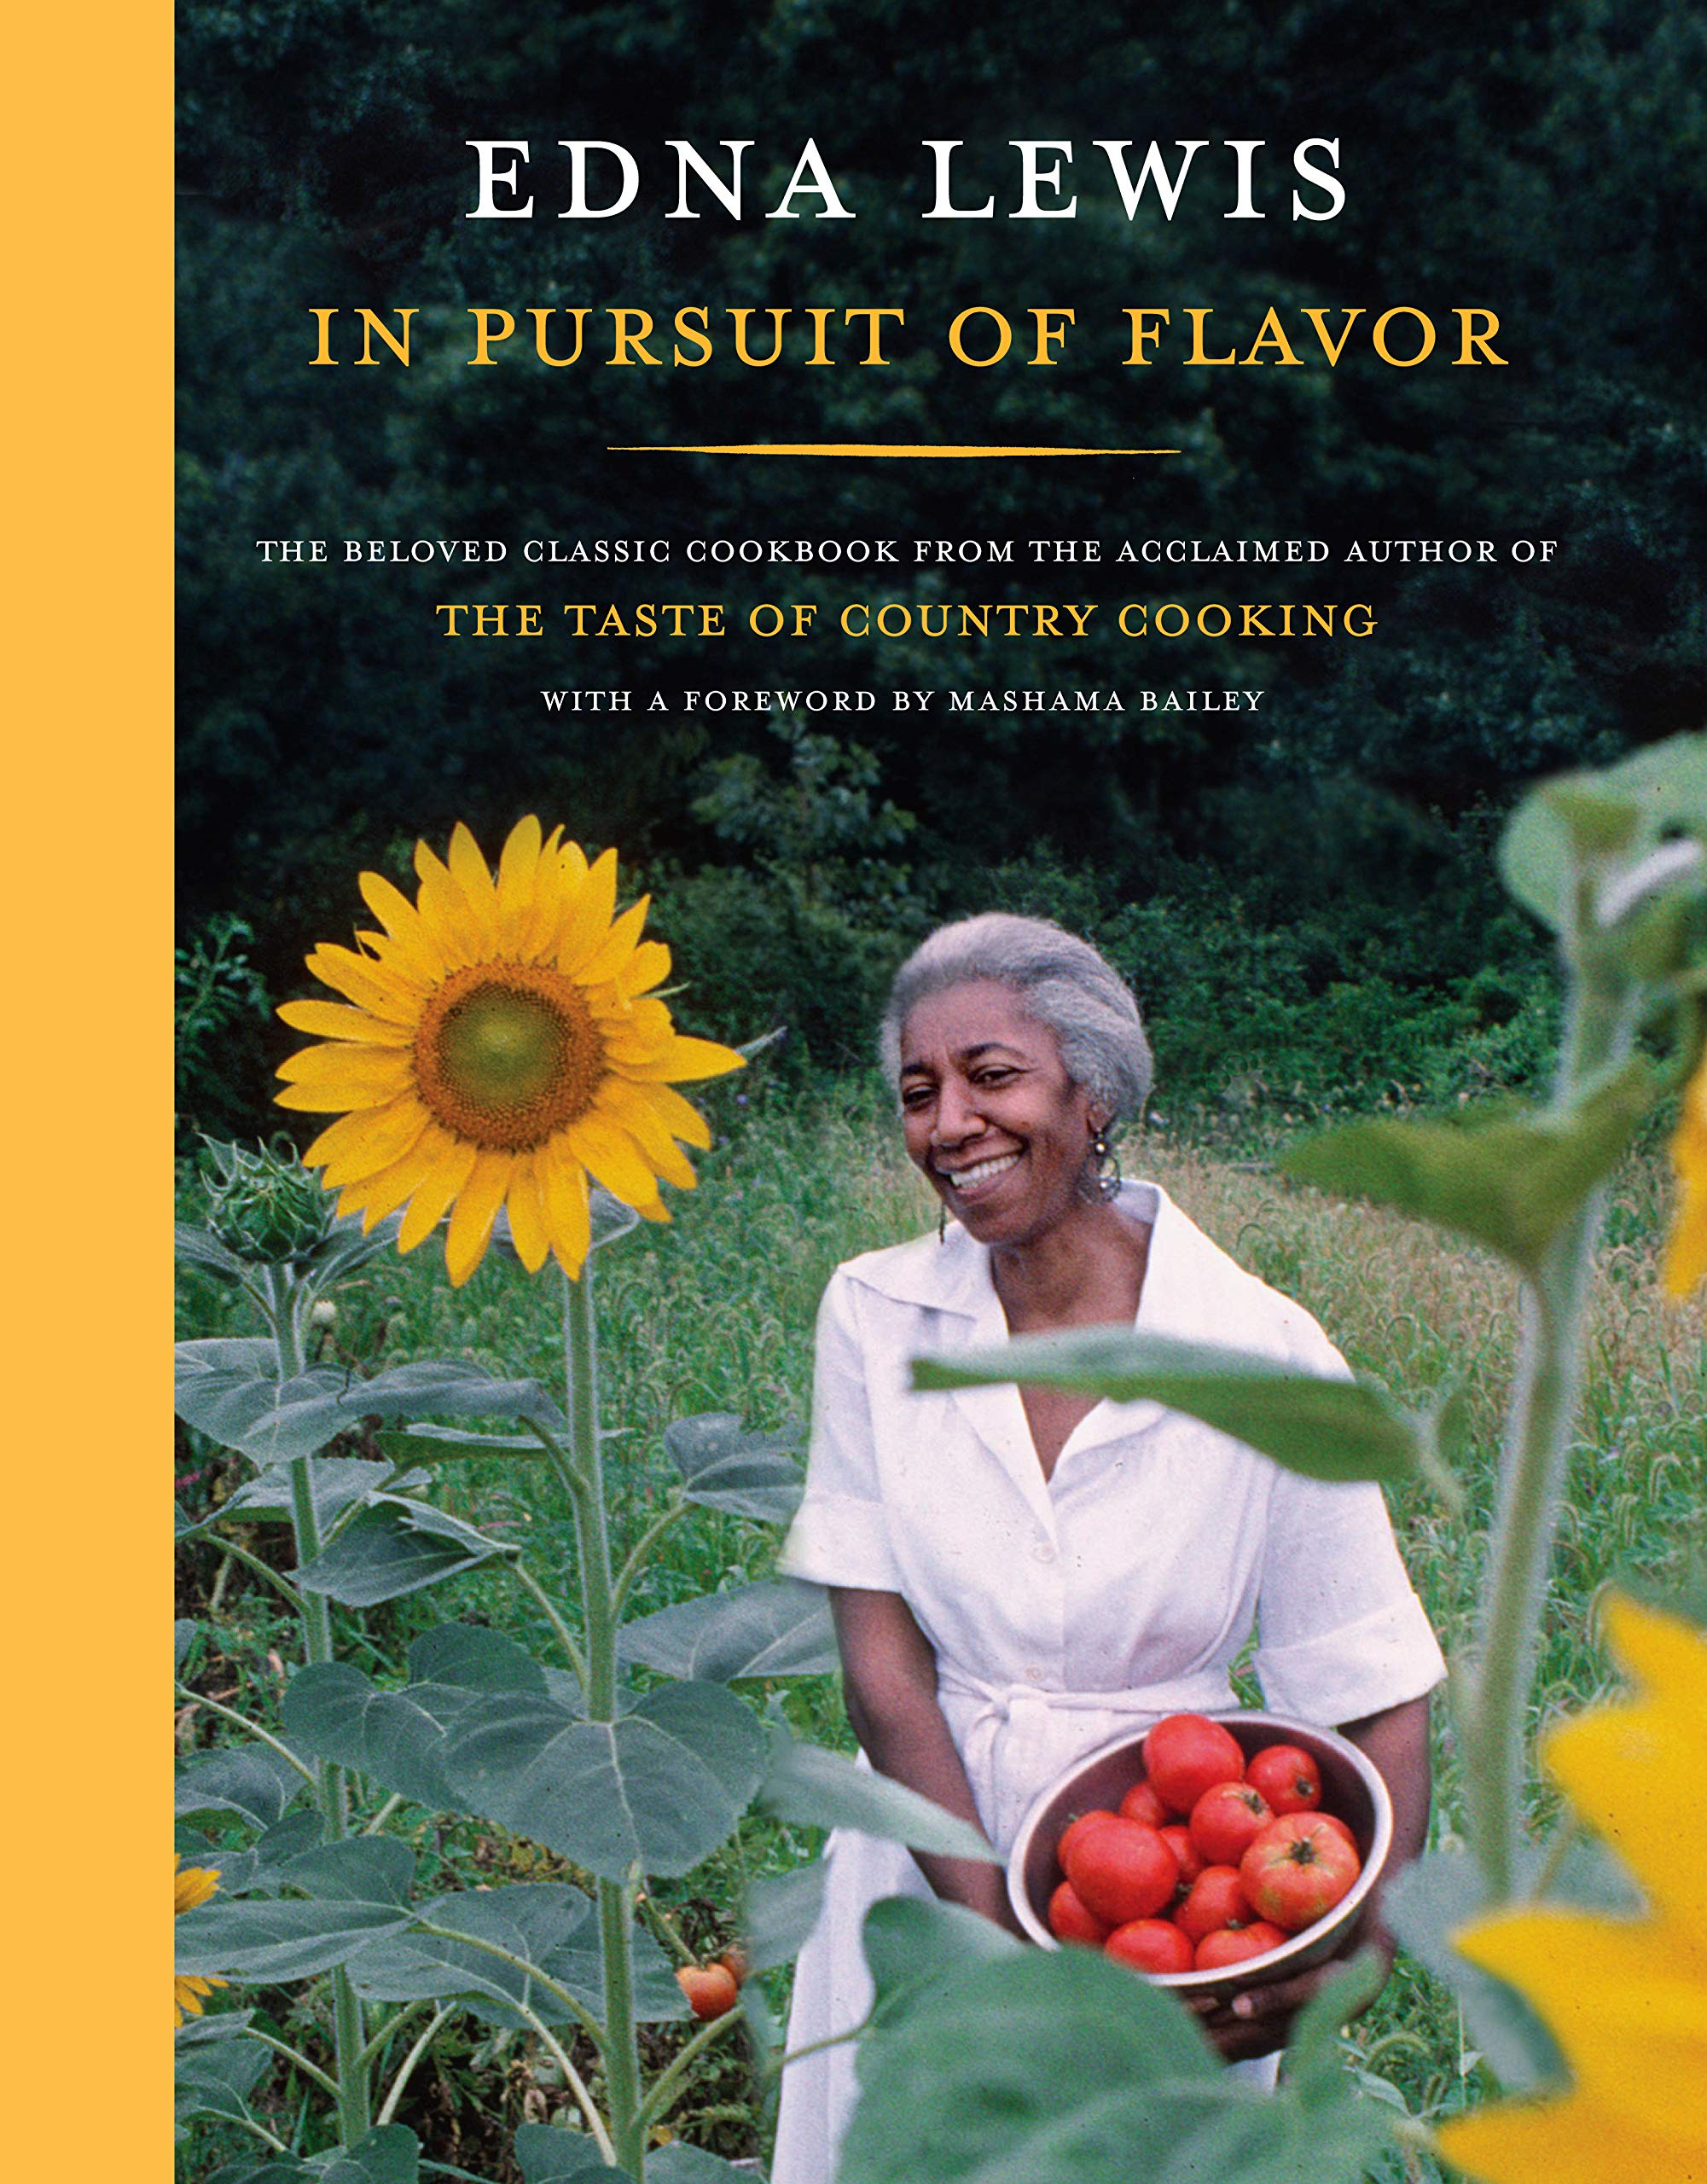 In Pursuit of Flavor: The Beloved Classic Cookbook from the Acclaimed Author of The Taste of Country Cooking (Edna Lewis)